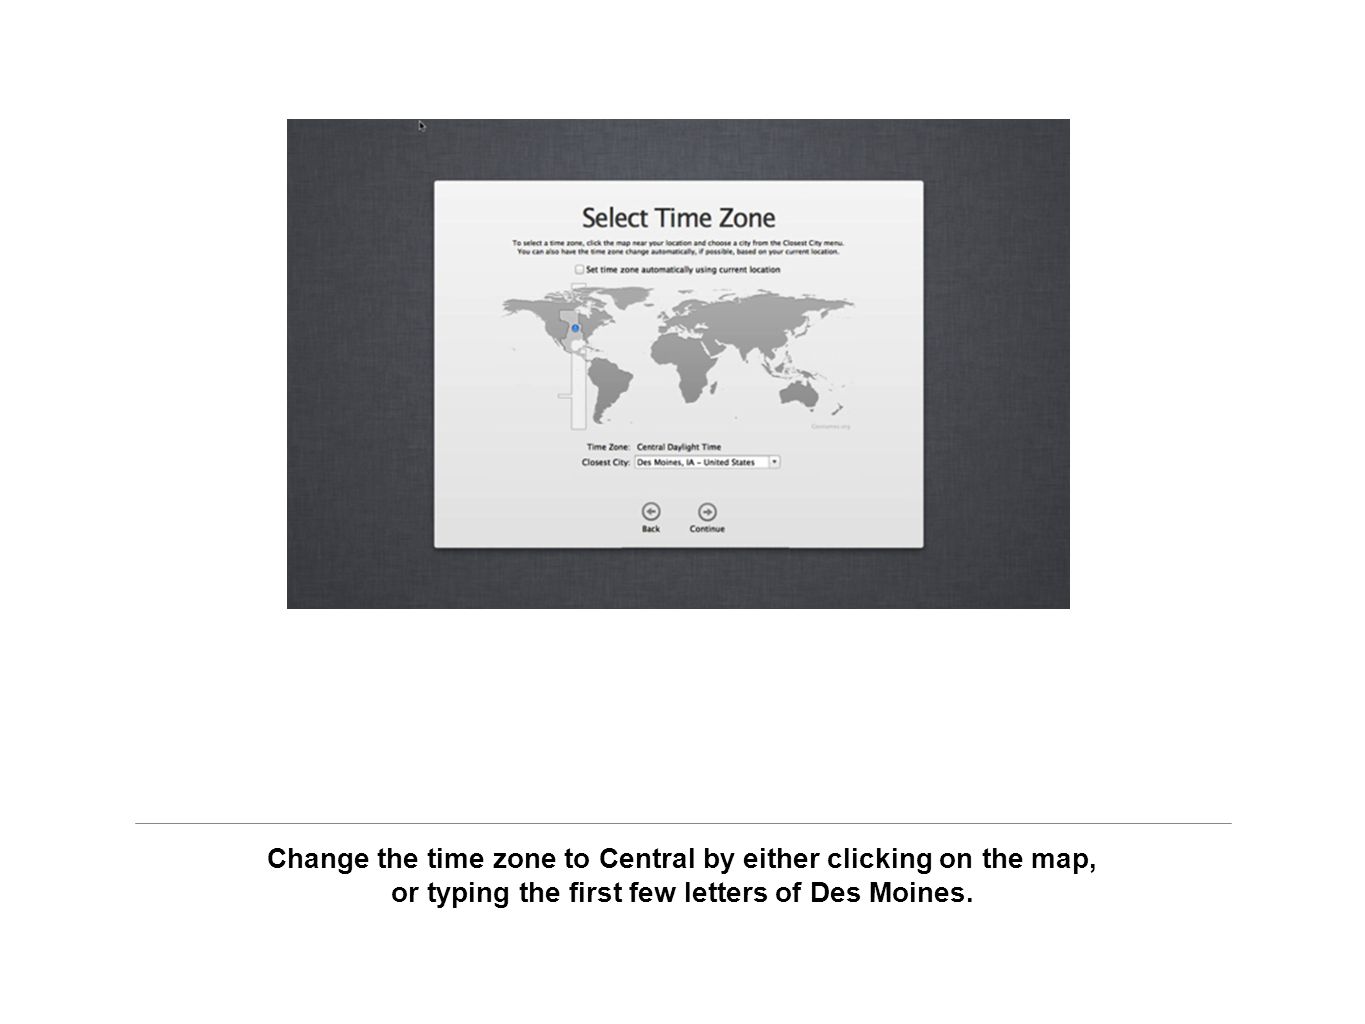 Change the time zone to Central by either clicking on the map, or typing the first few letters of Des Moines.